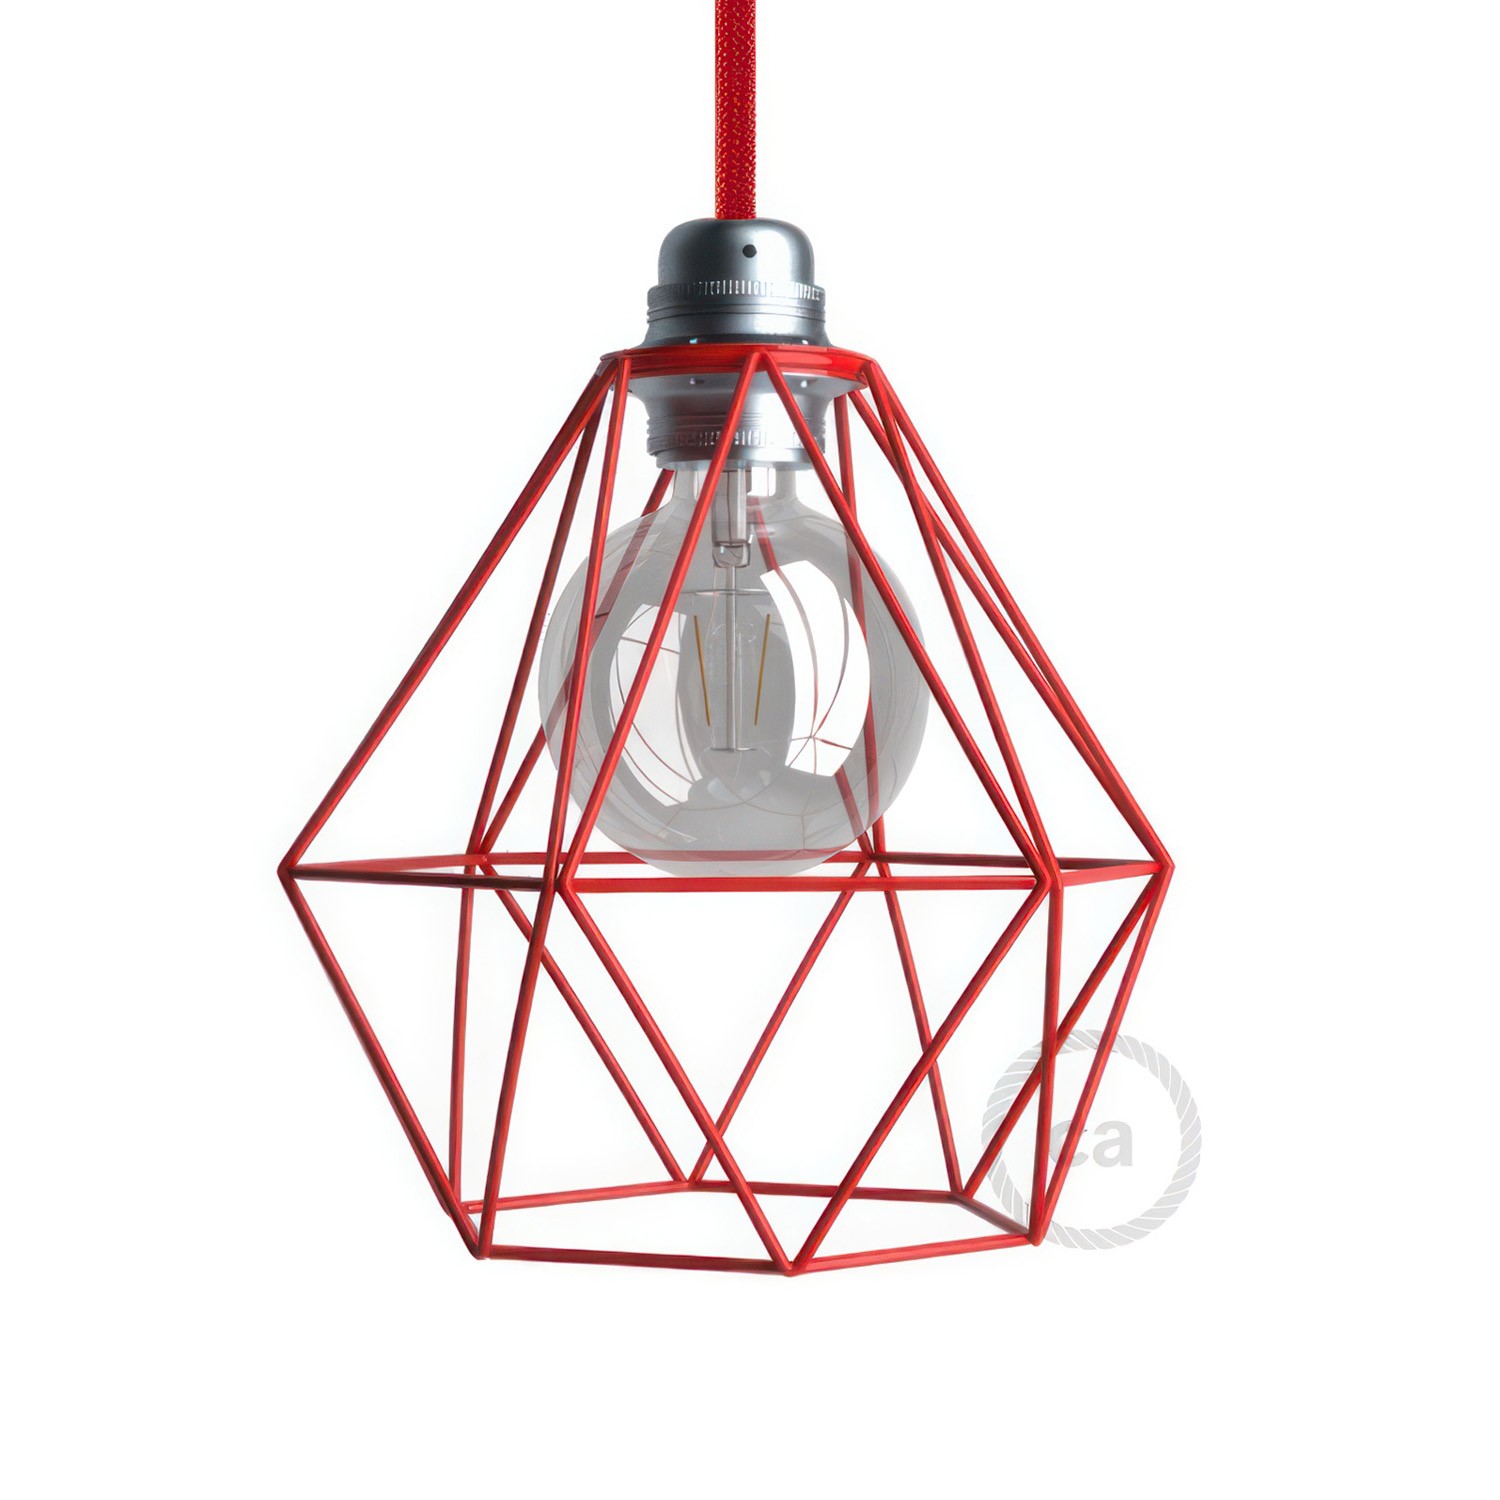 Naked light bulb cage metal lampshade Diamond with E27 fitting